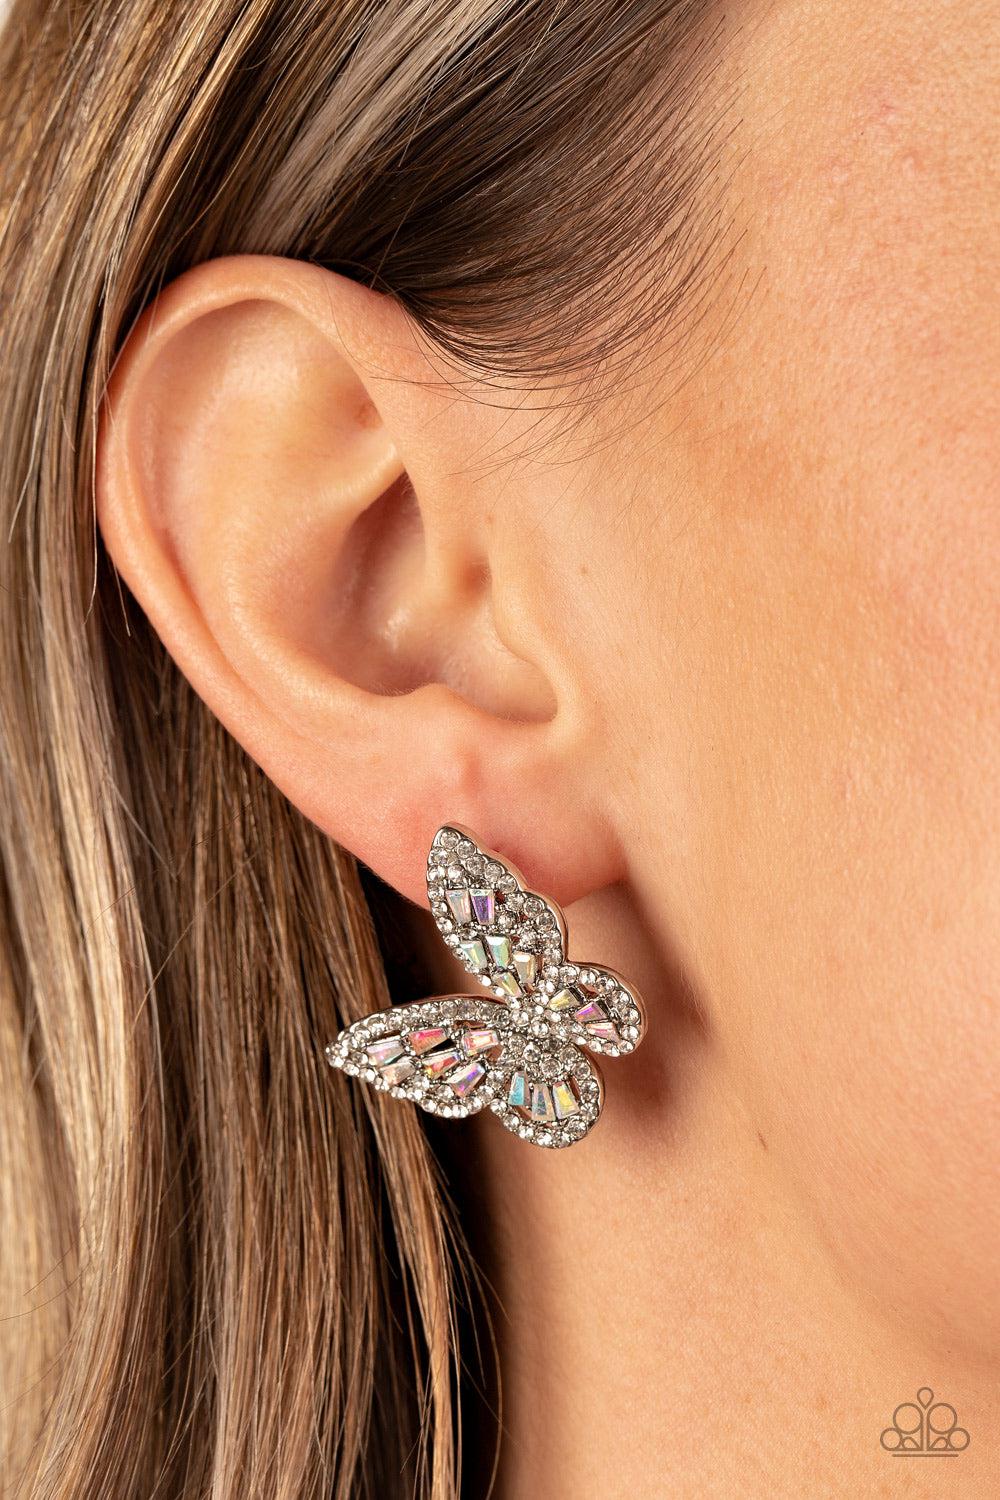 Smooth Like FLUTTER Multi Iridescent Gem Butterfly Earrings - Paparazzi Accessories-on model - CarasShop.com - $5 Jewelry by Cara Jewels